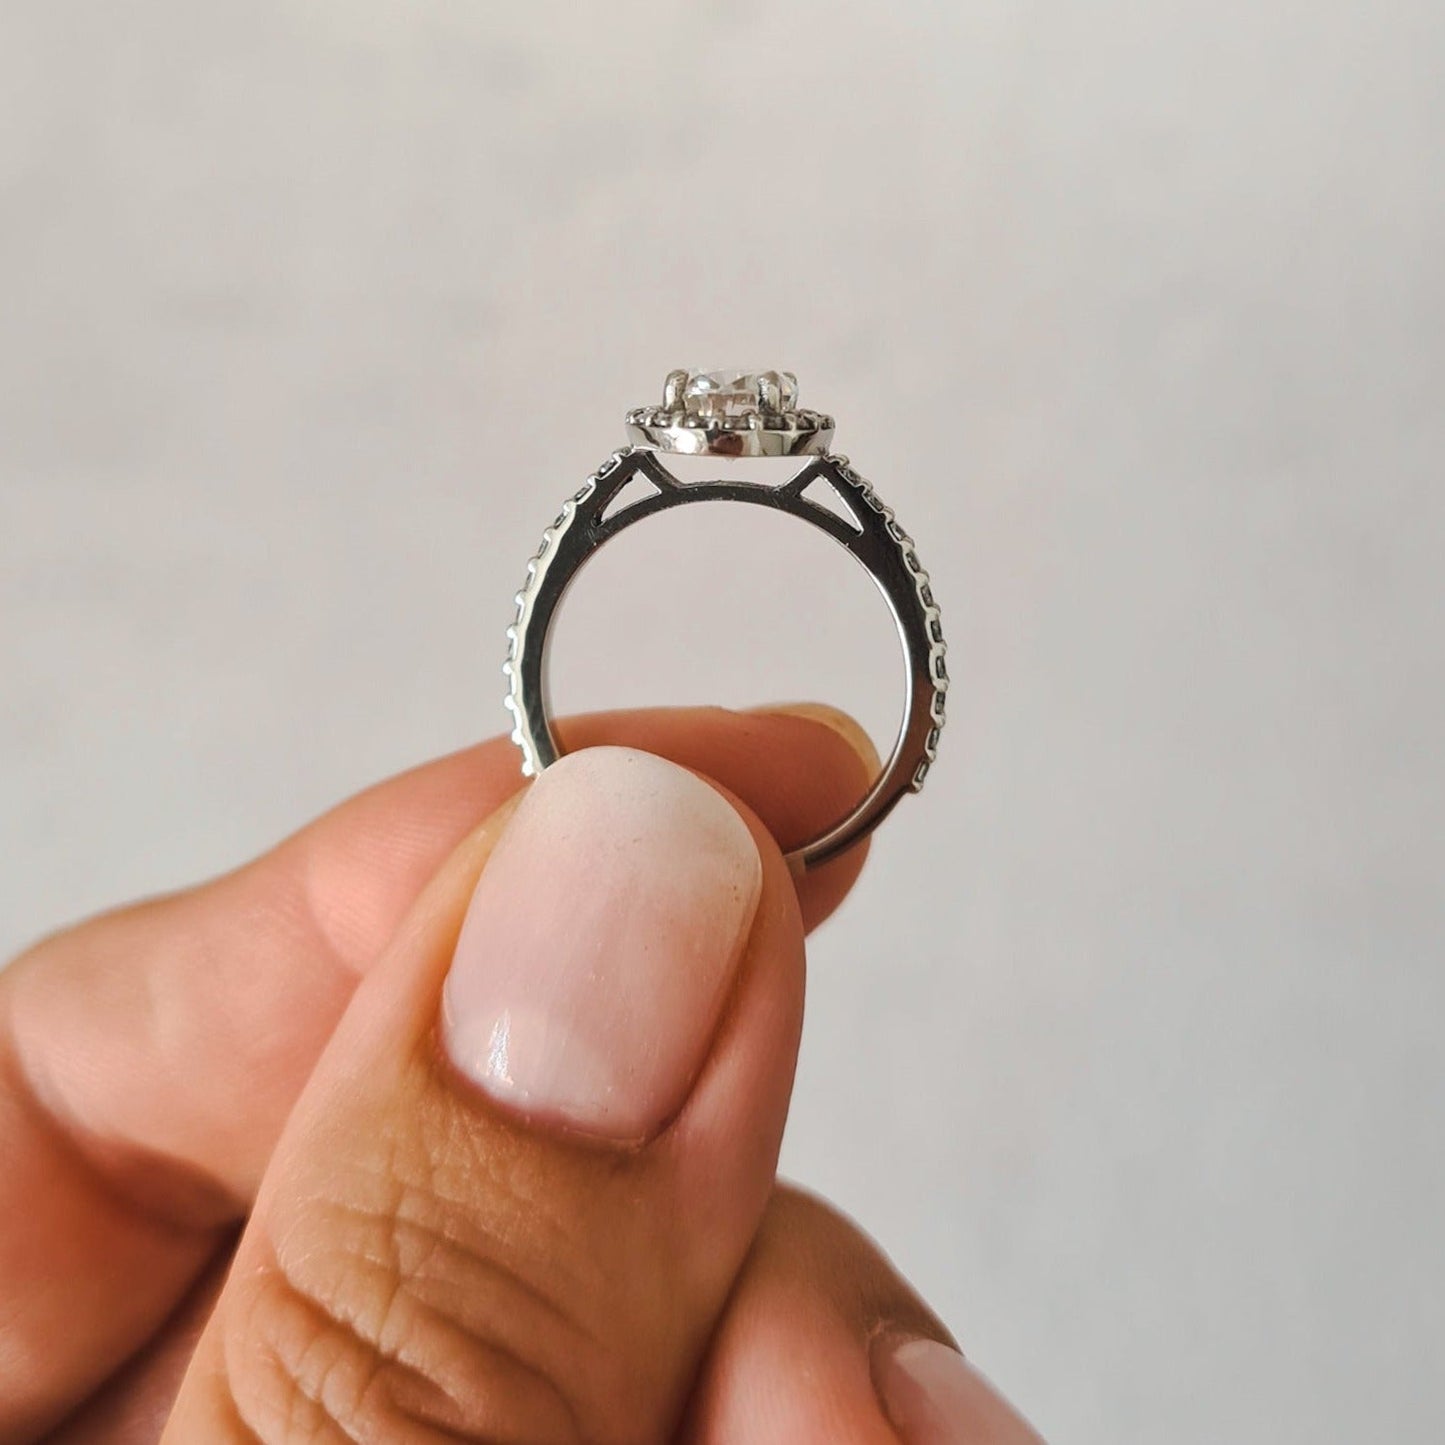 1.5 carat oval halo moissanite engagement ring set in platinum held between fingers for size reference